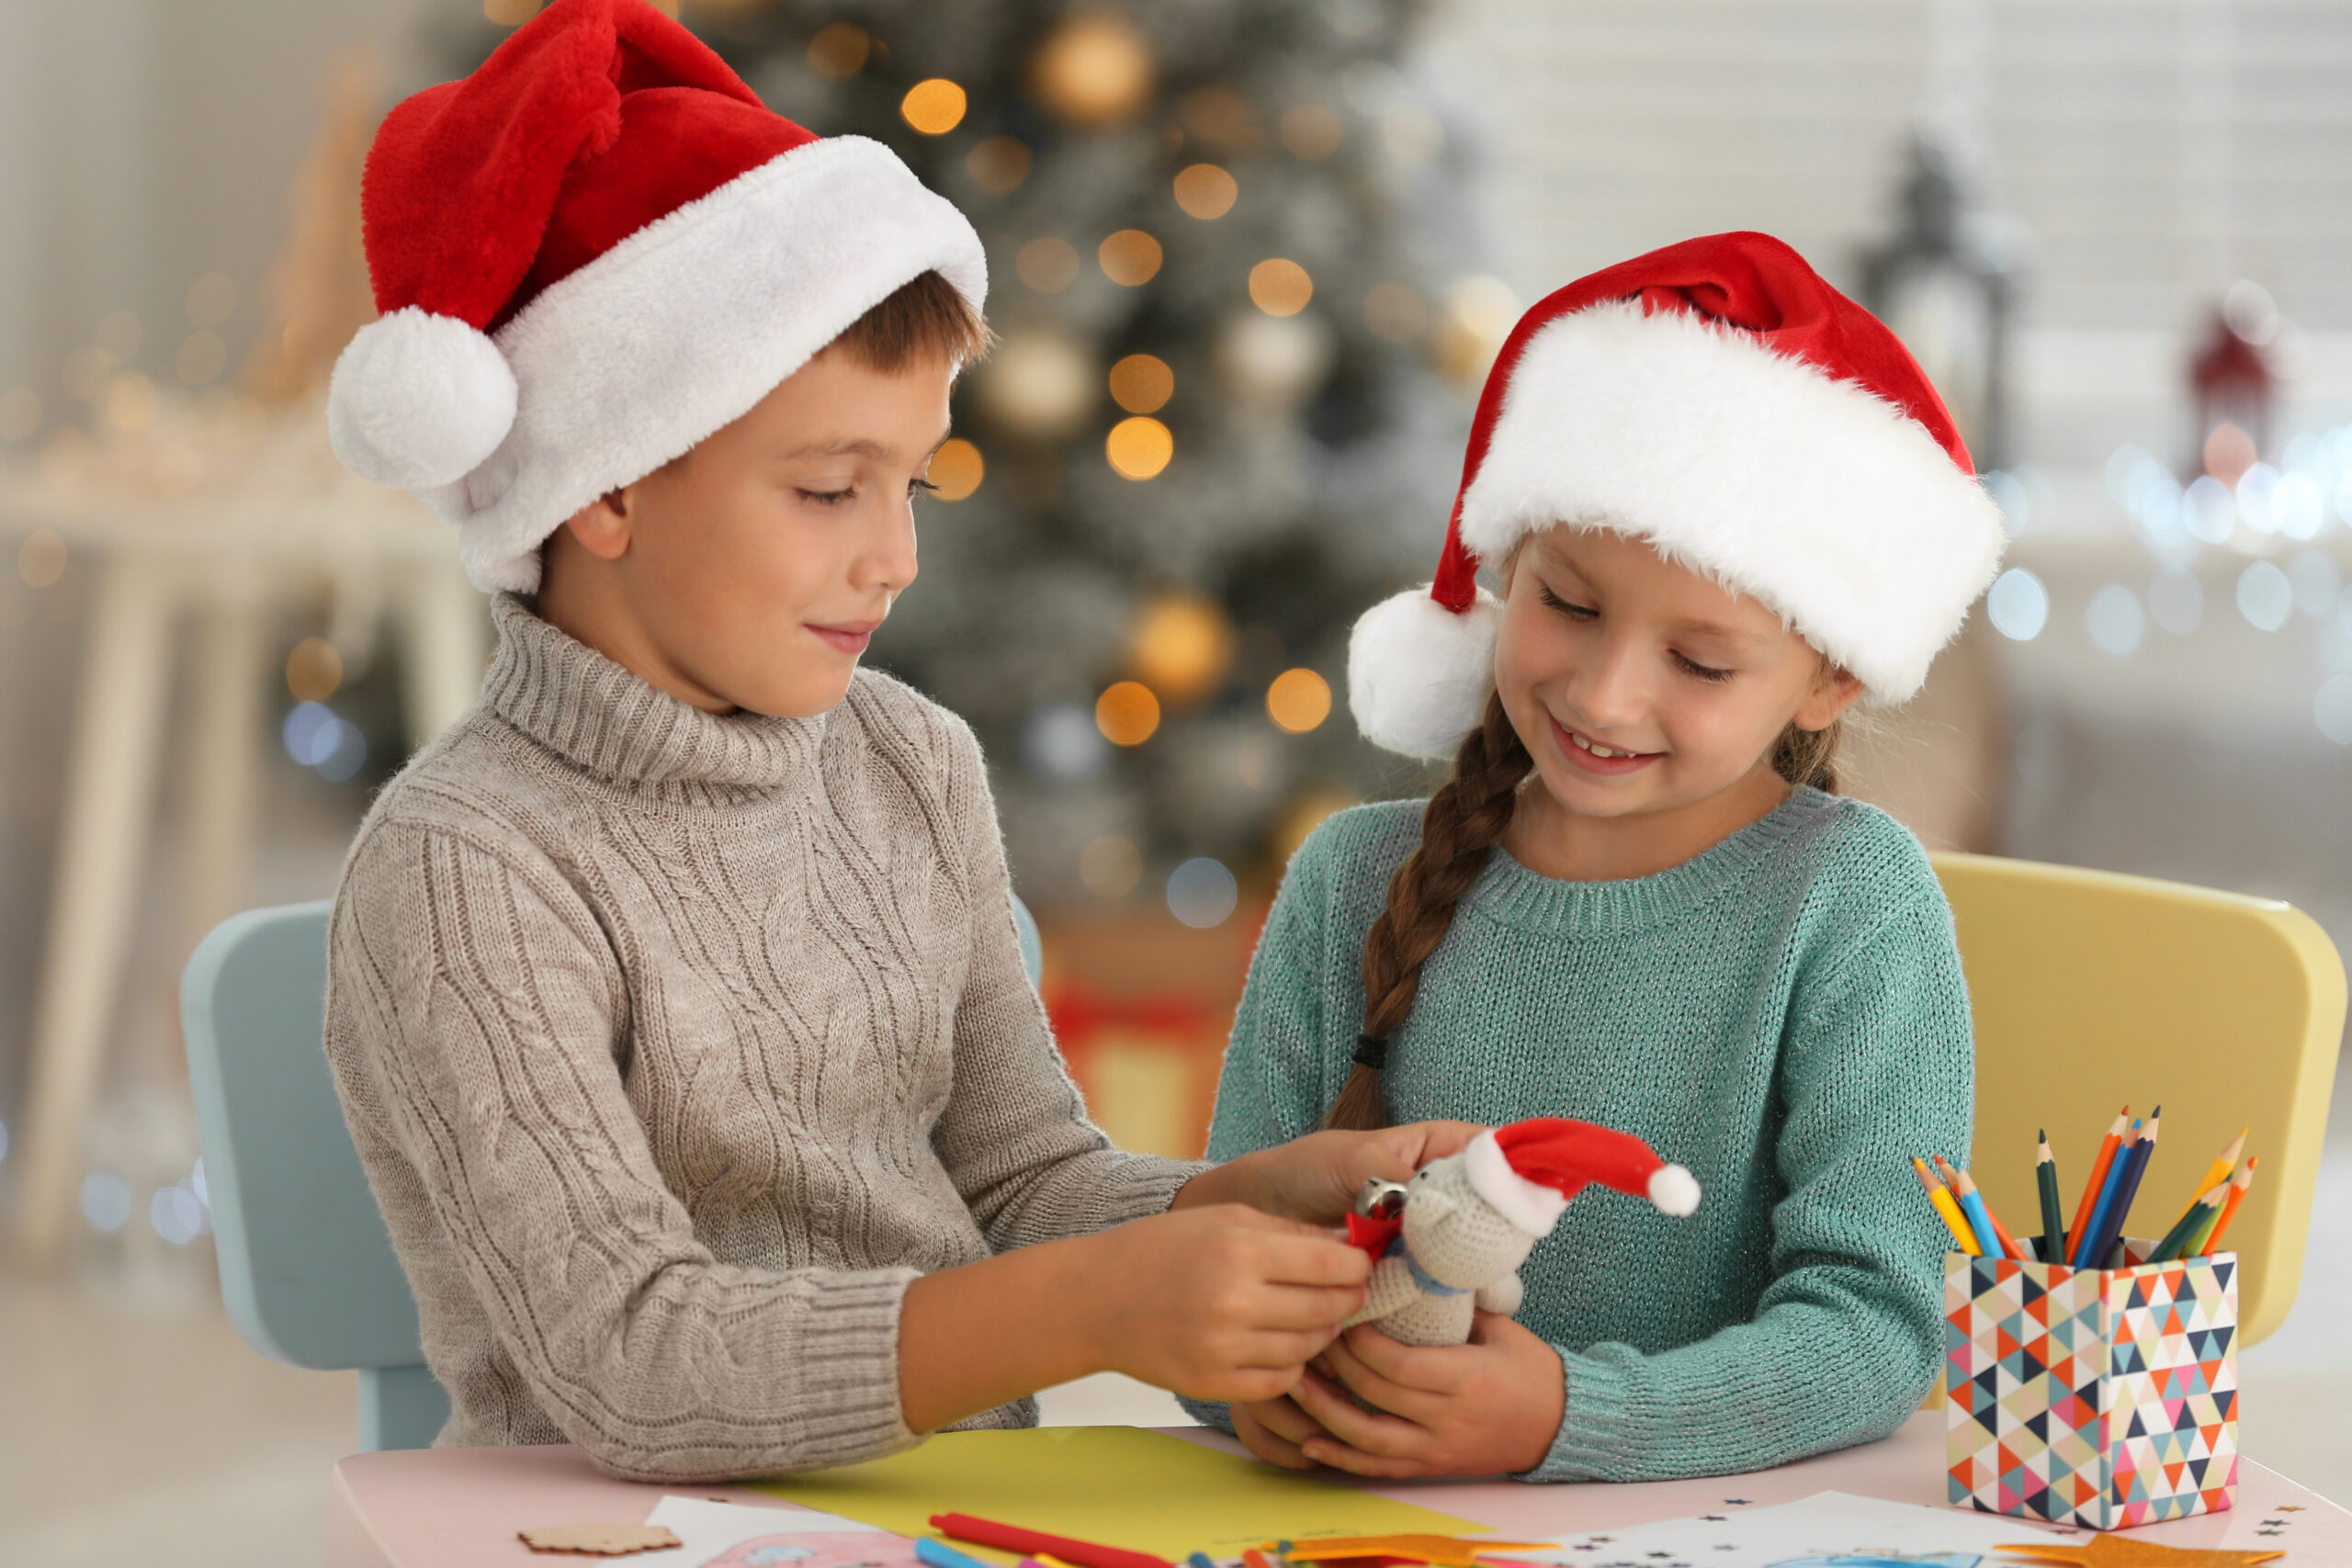 Two children, who are both wearing Santa hats, sitting indoors at a table. They are playing with a festive toy.